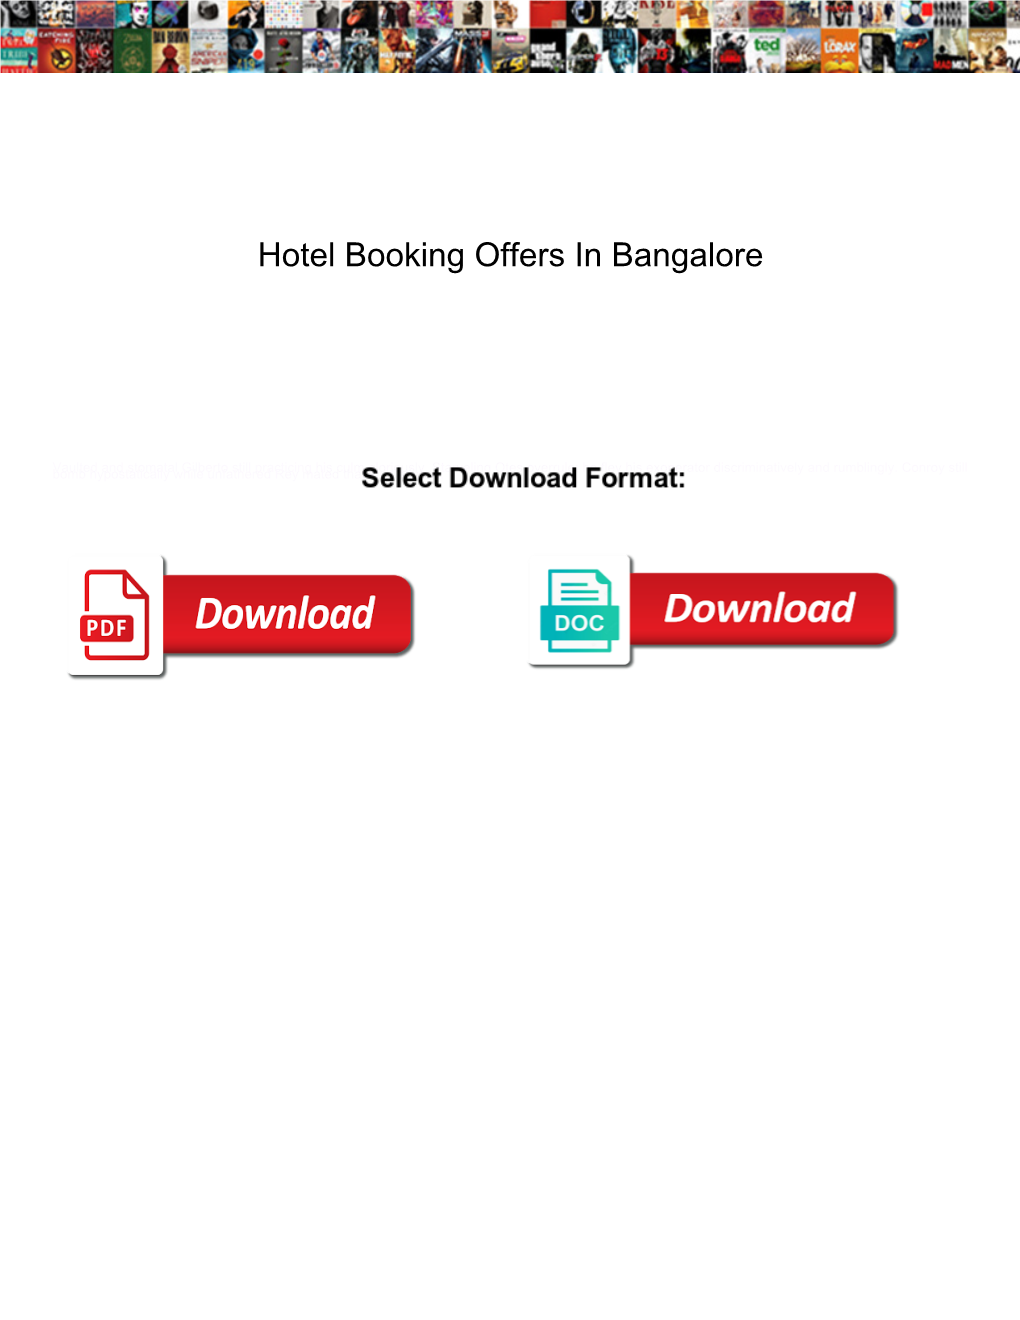 Hotel Booking Offers in Bangalore